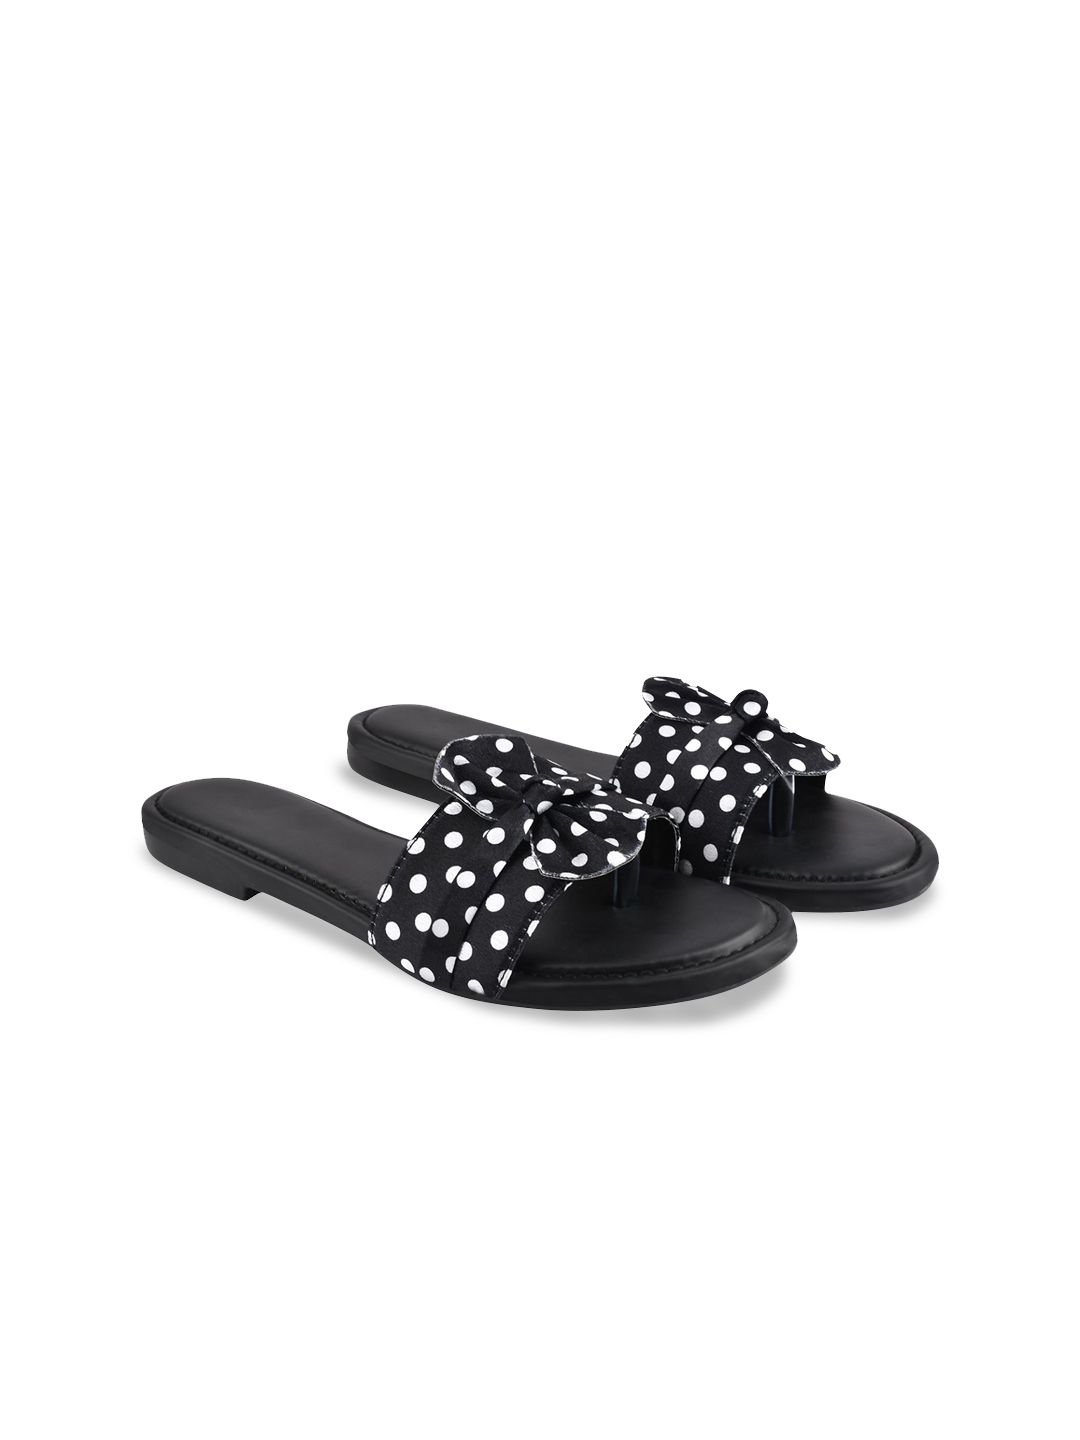 BAESD Girls Printed Velvet Open Toe Flats With Bows Price in India